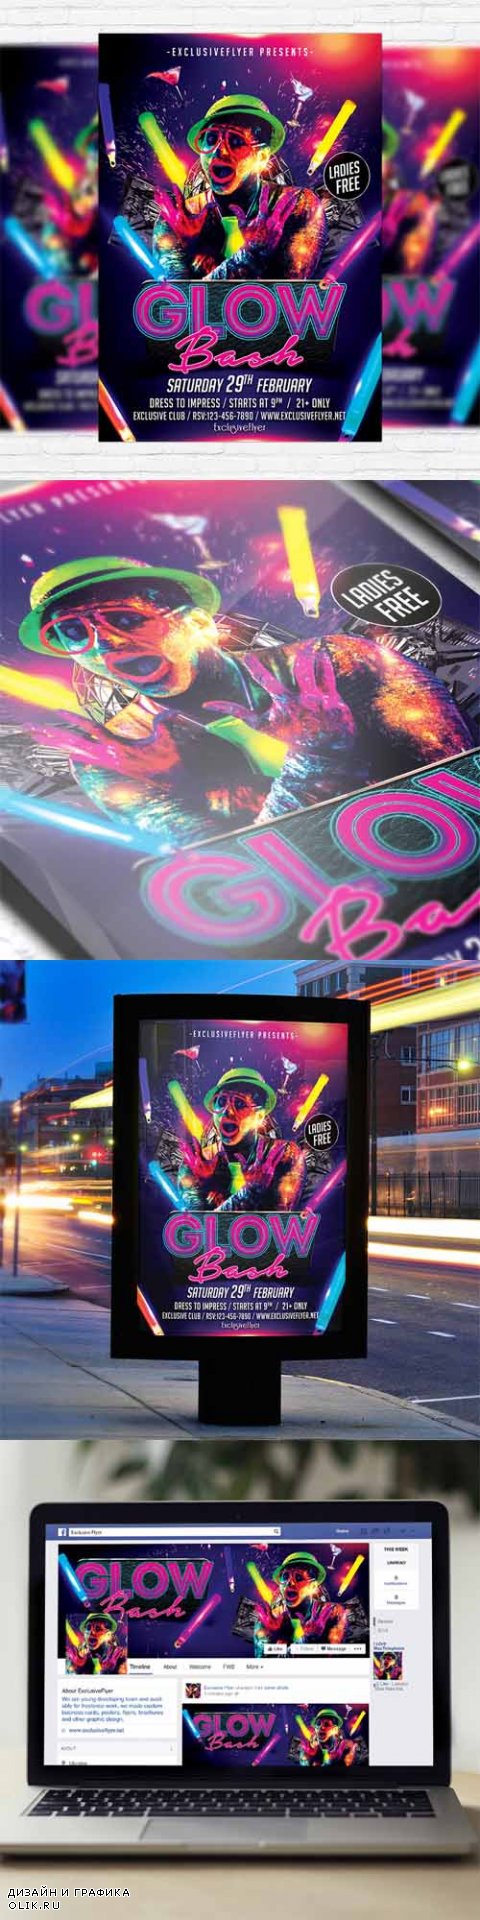 Flyer Template - Glow Bash + Facebook Cover